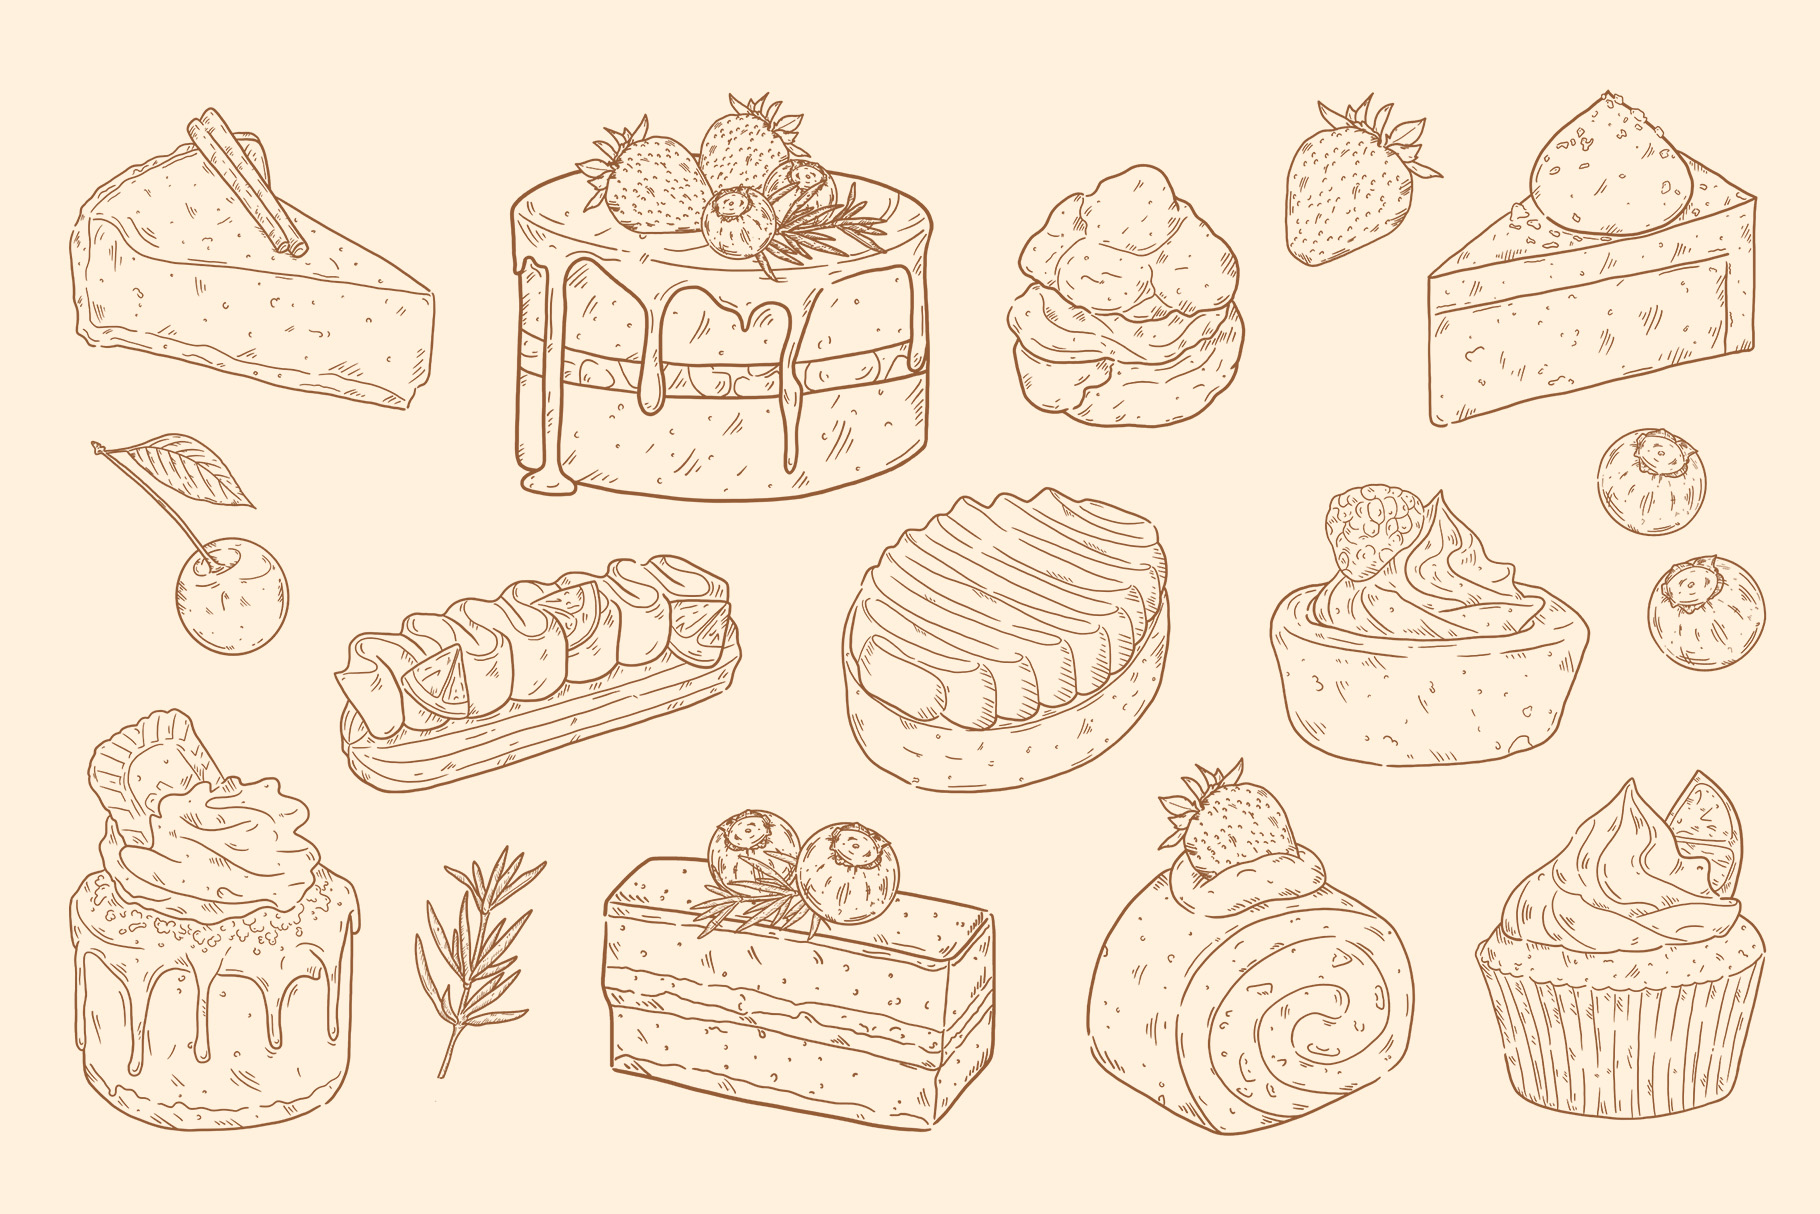 Cakes and Dessert Clipart Illustration (PSD, PNG Format)